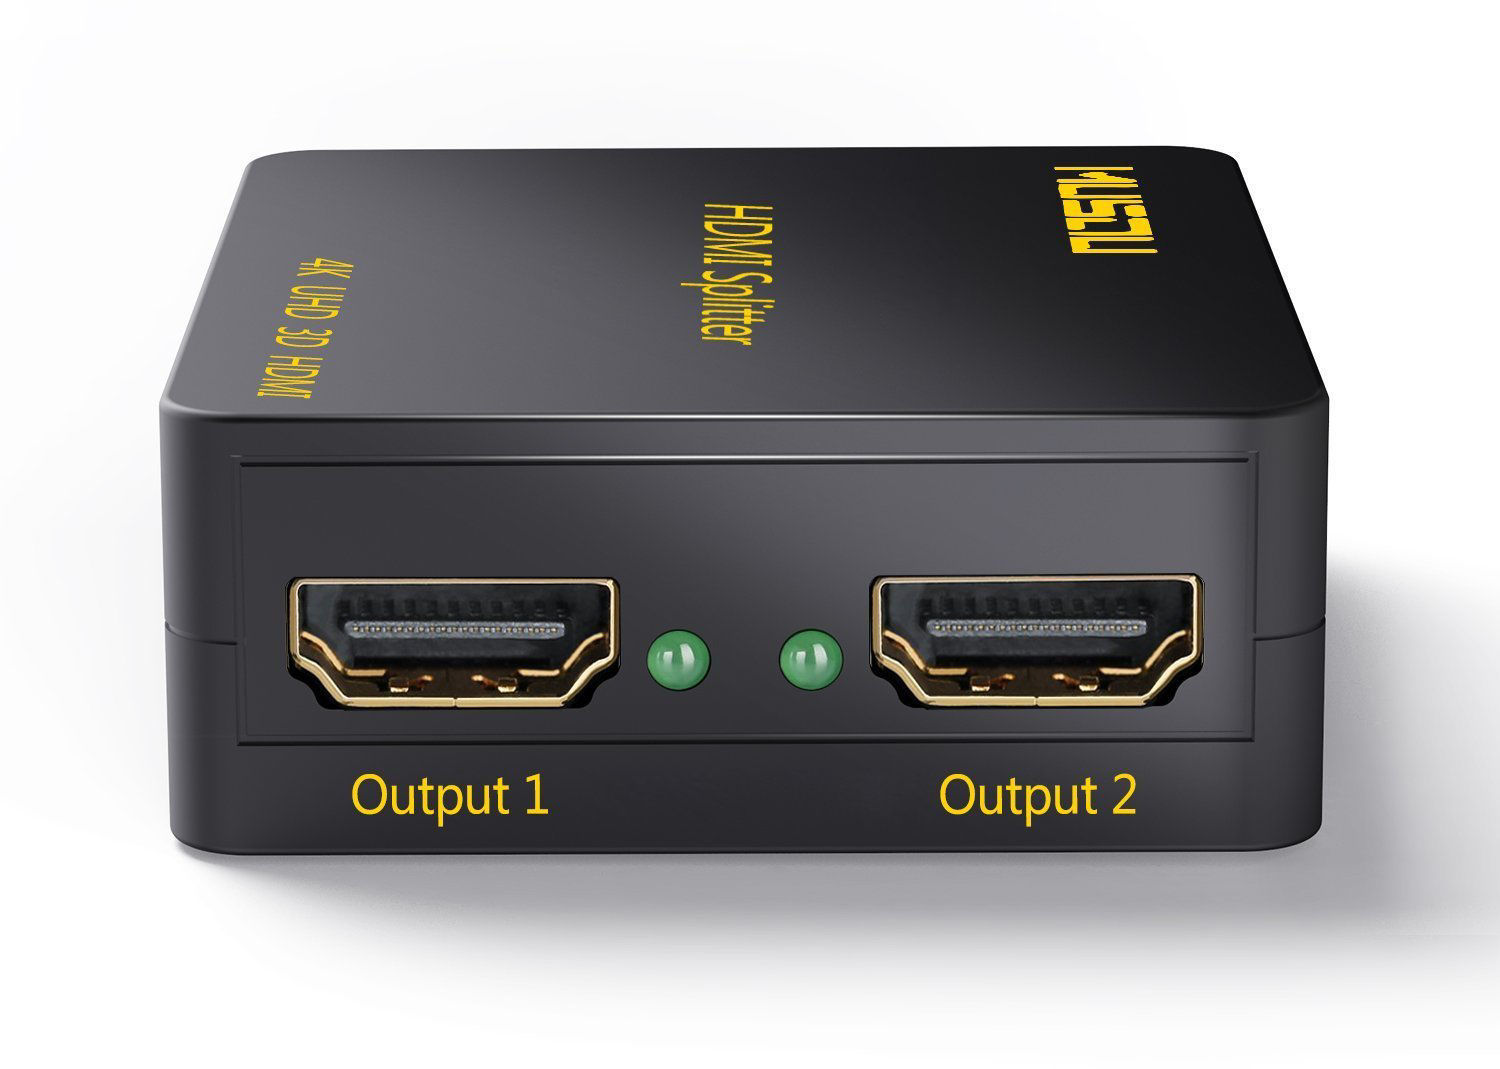 hdmi splitter 1 in 2 out with audio